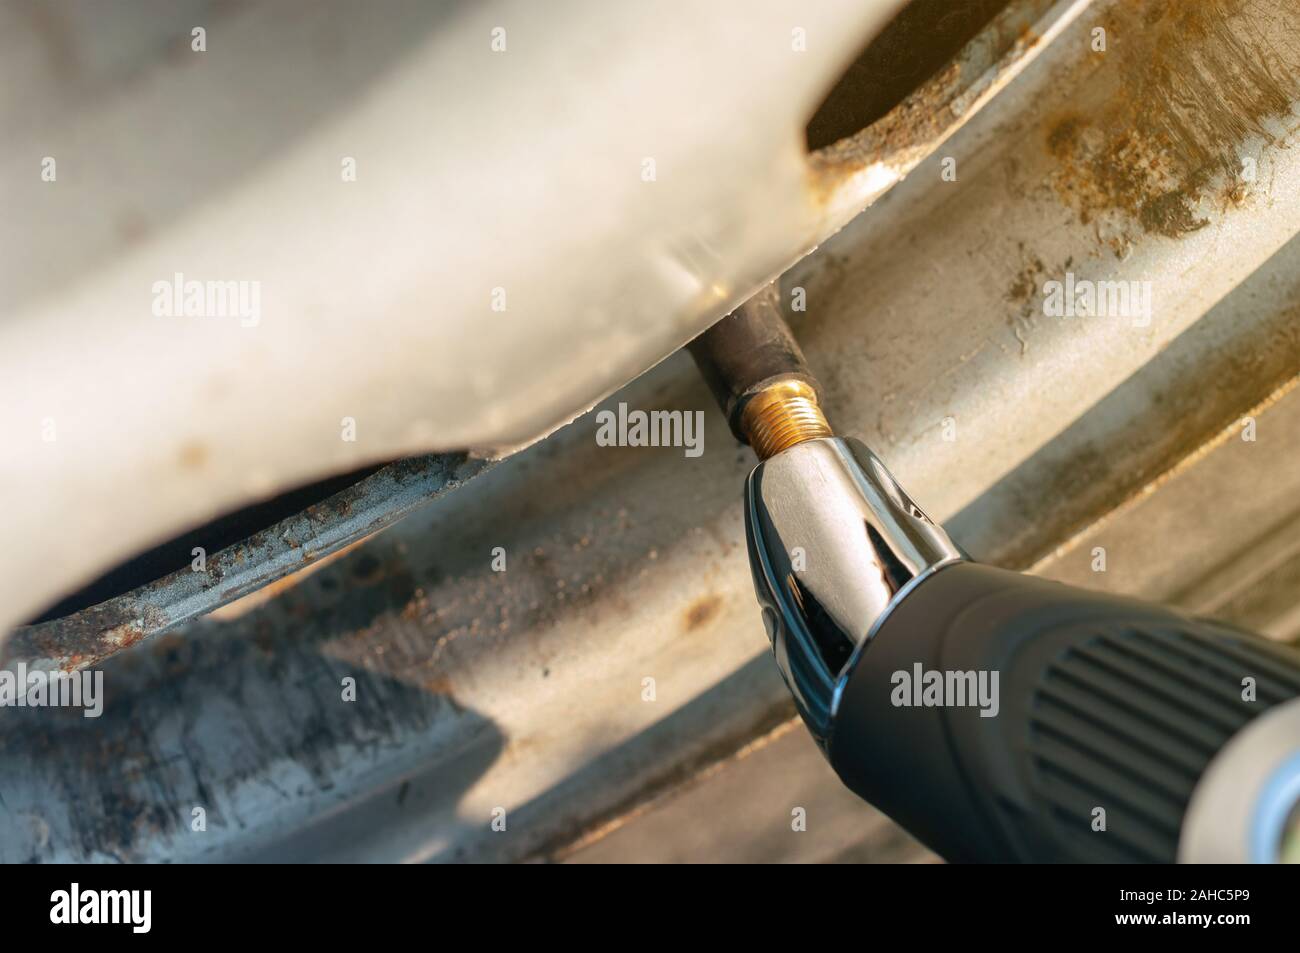 Car tire pressure check with gauge Stock Photo